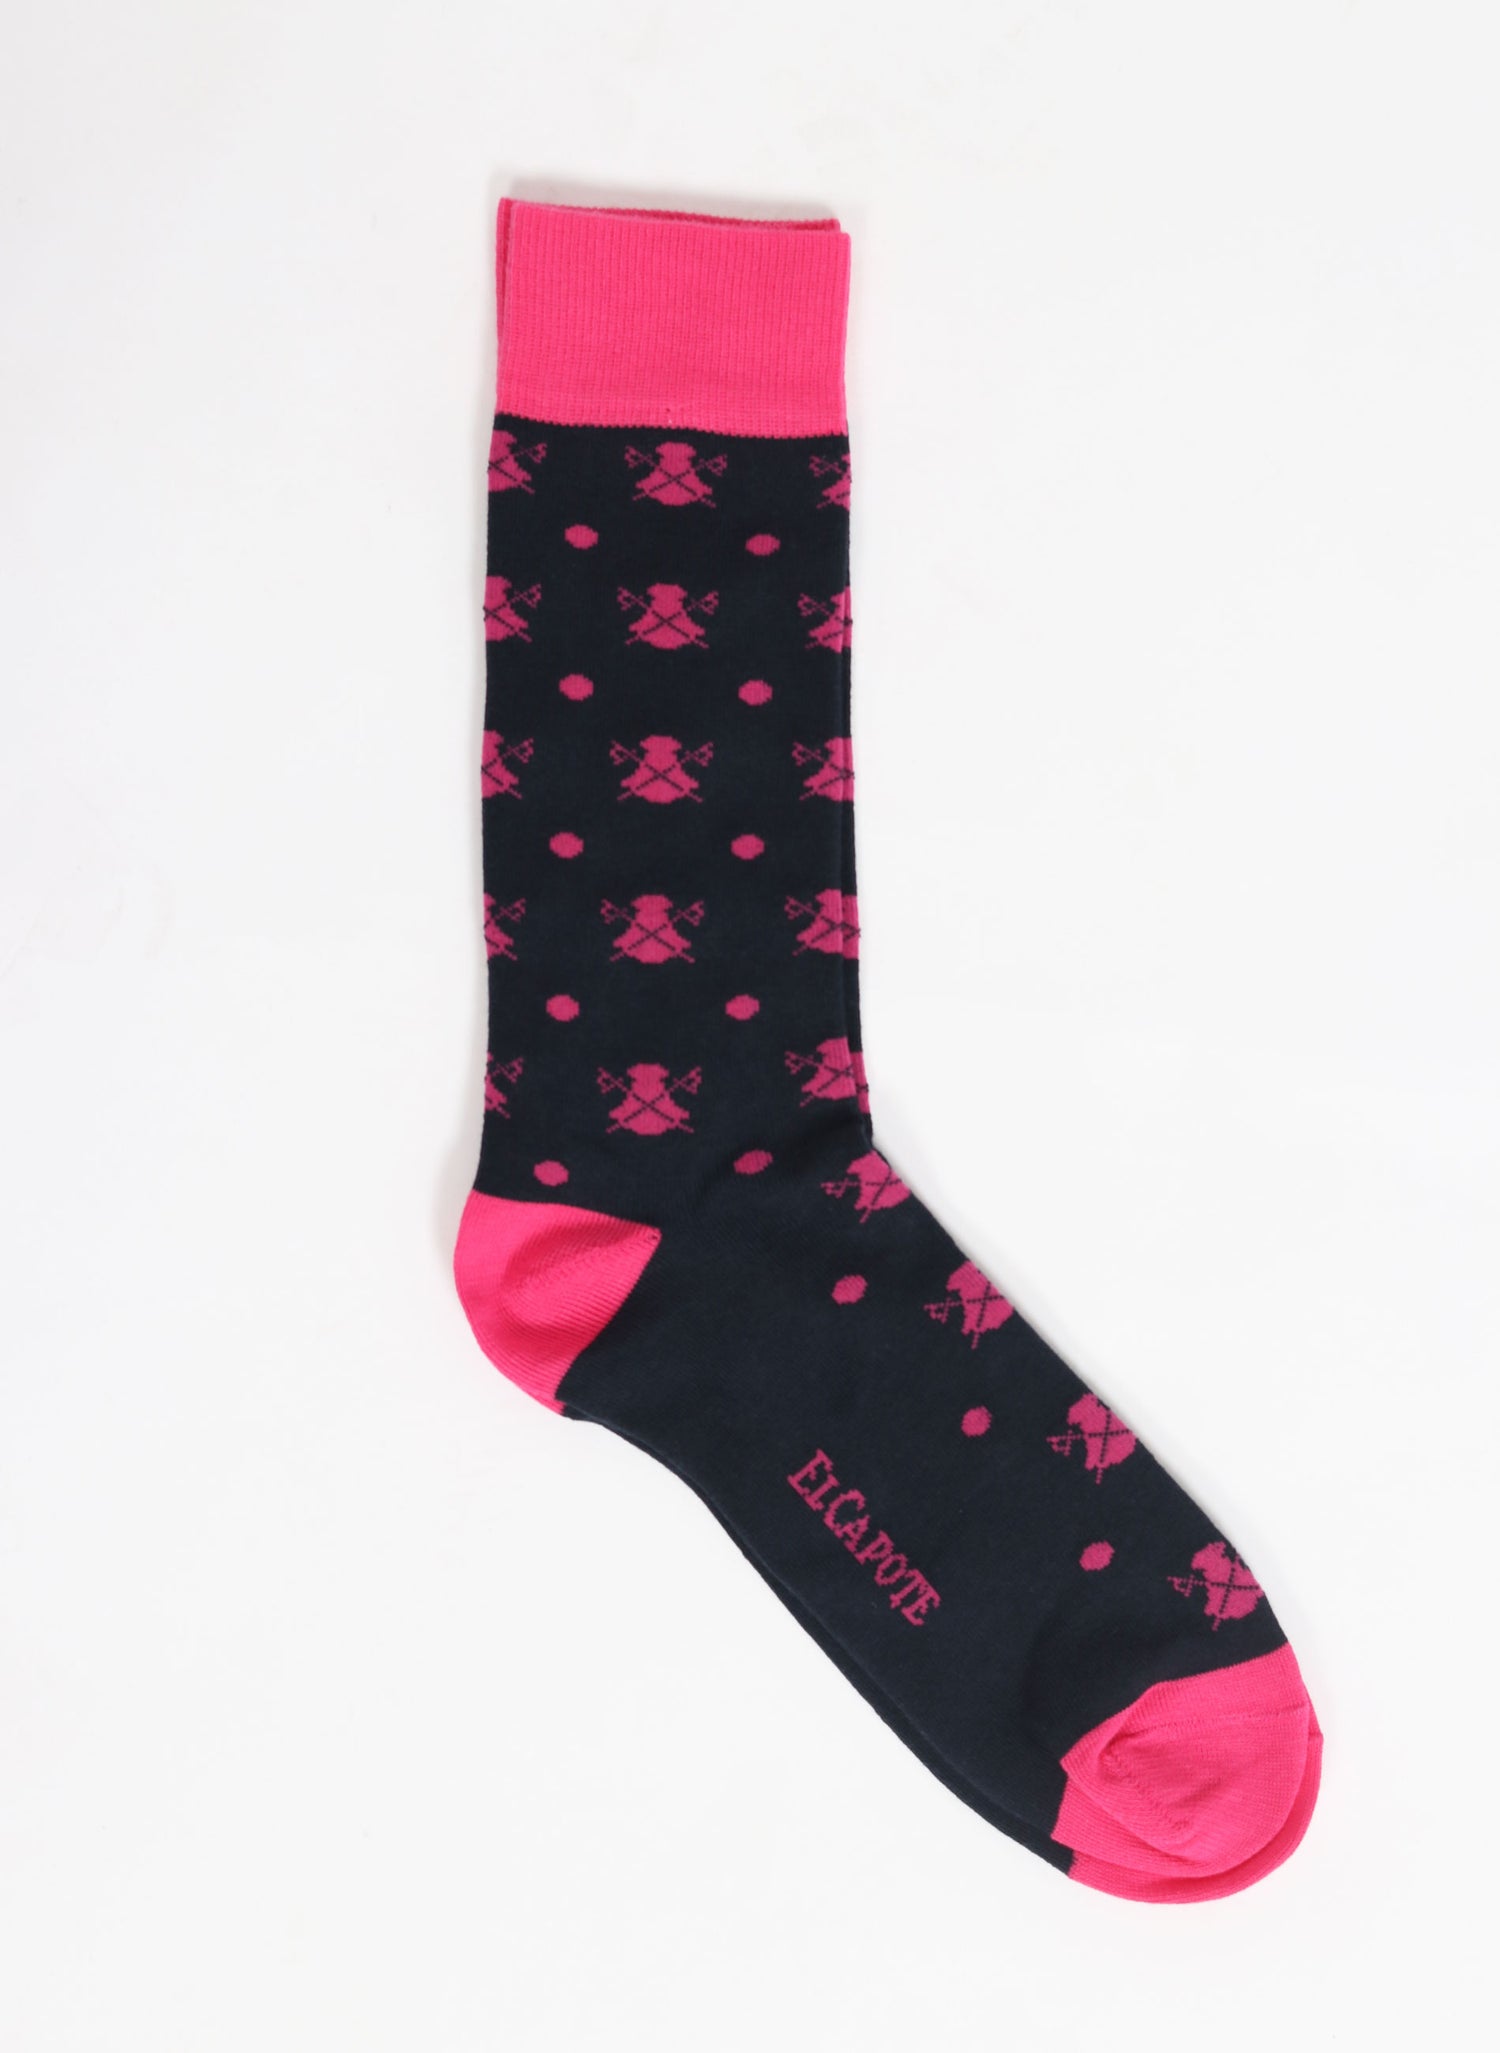 Navy Blue Sock with Capes and Pink Polka Dots 